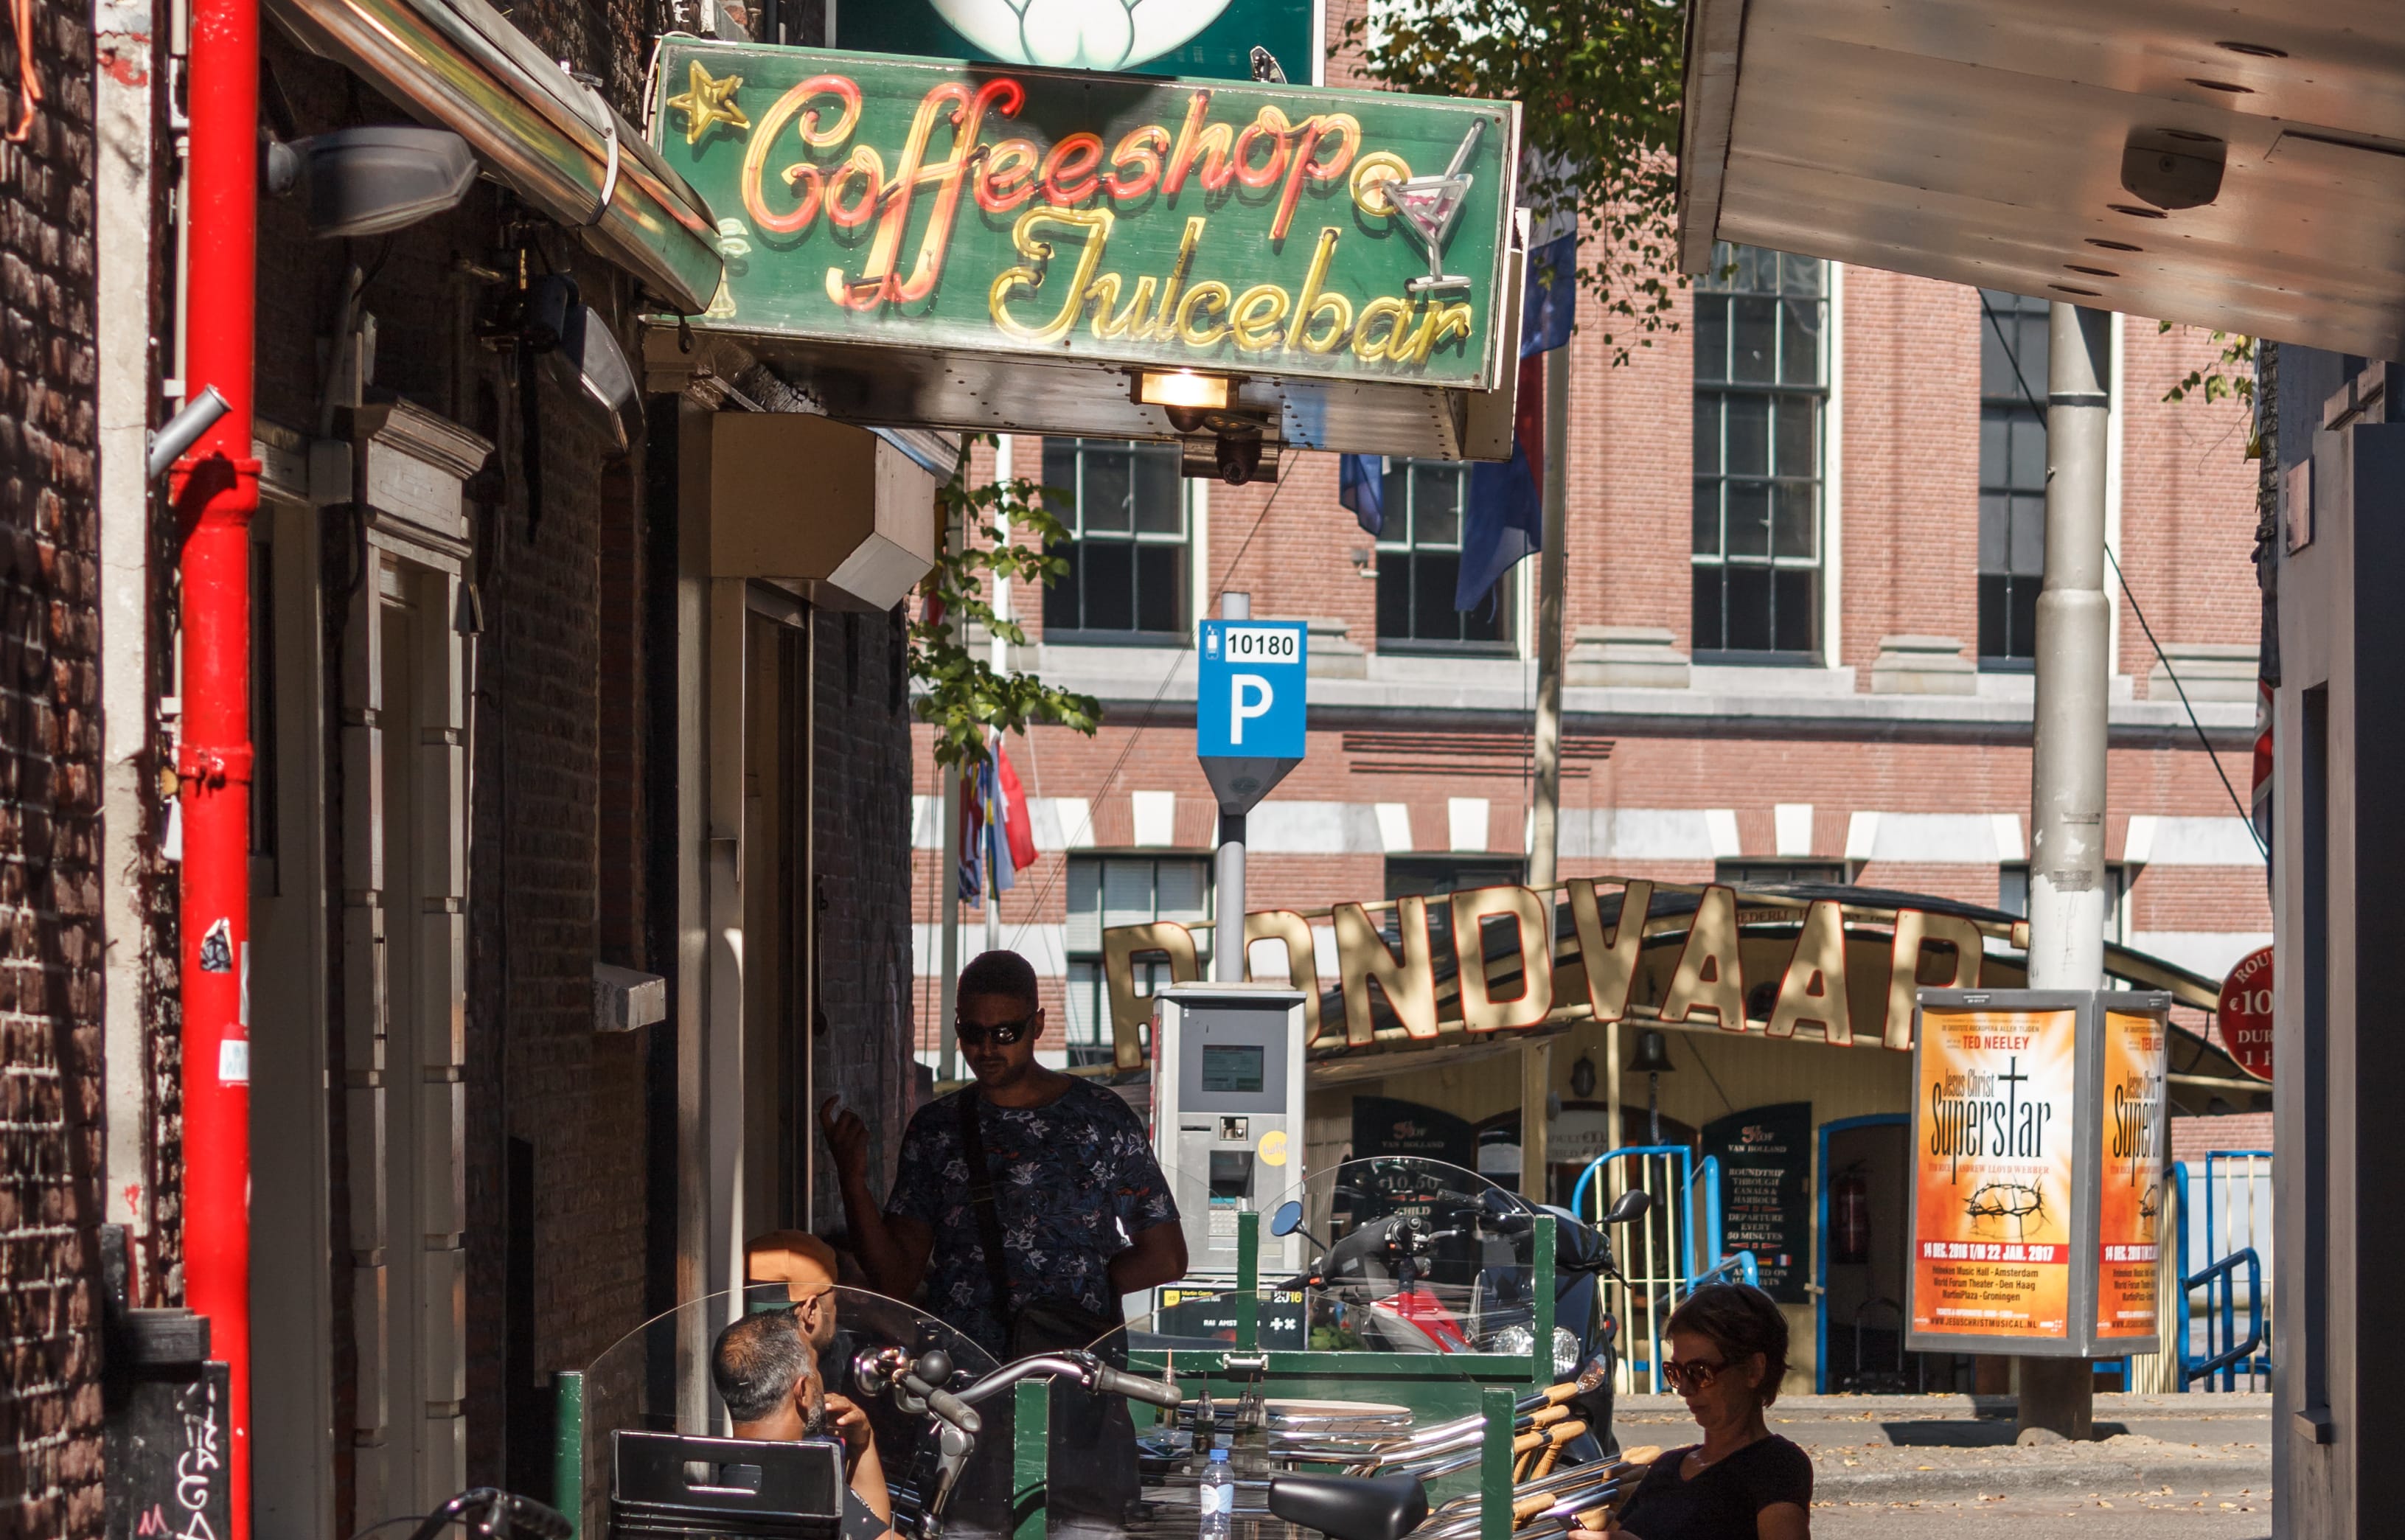 A view down Regulierssteeg as seen from the Amstel with sign for Spaghetti Web and Coffee Shop, The Saint.